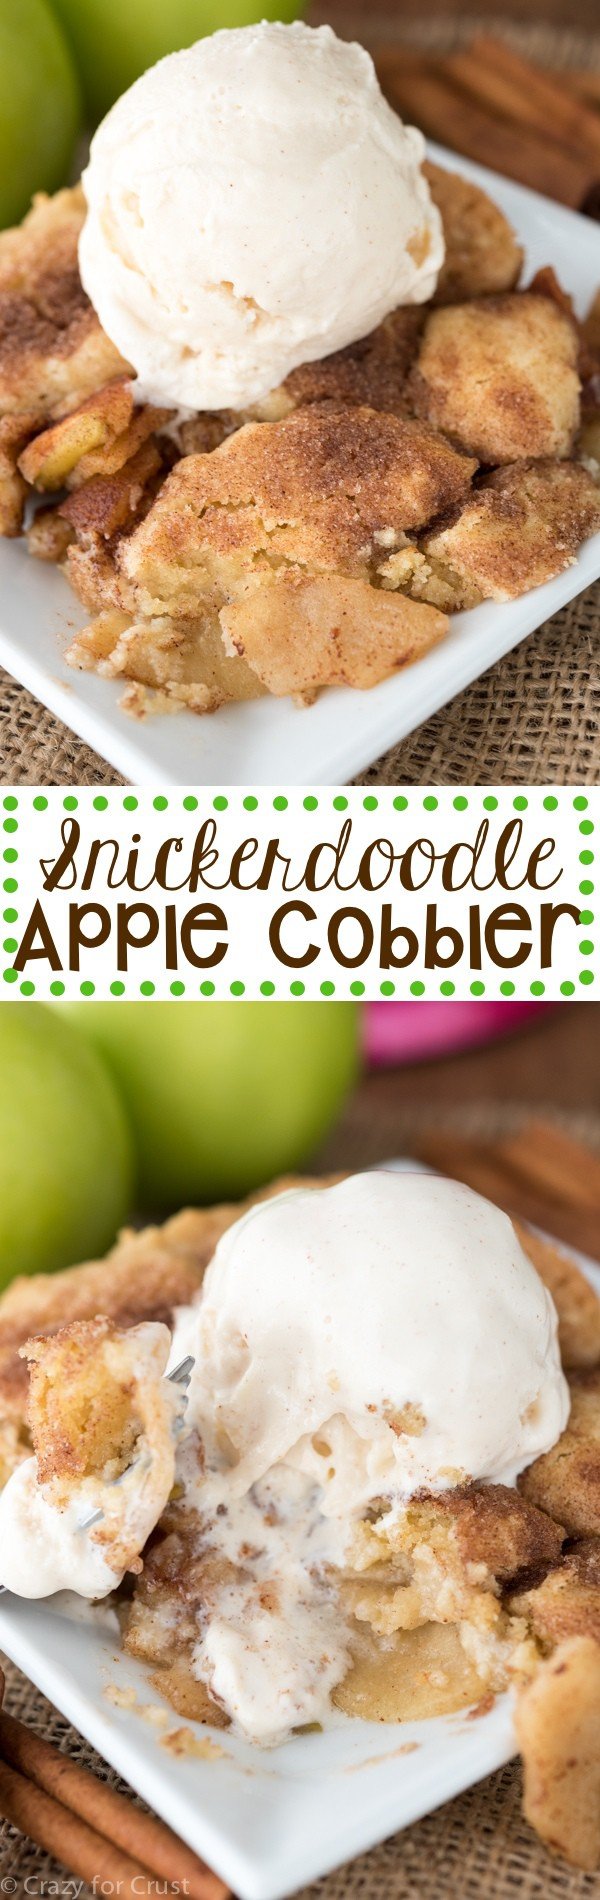 Snickerdoodle apple cobbler collage photo with words in the middle